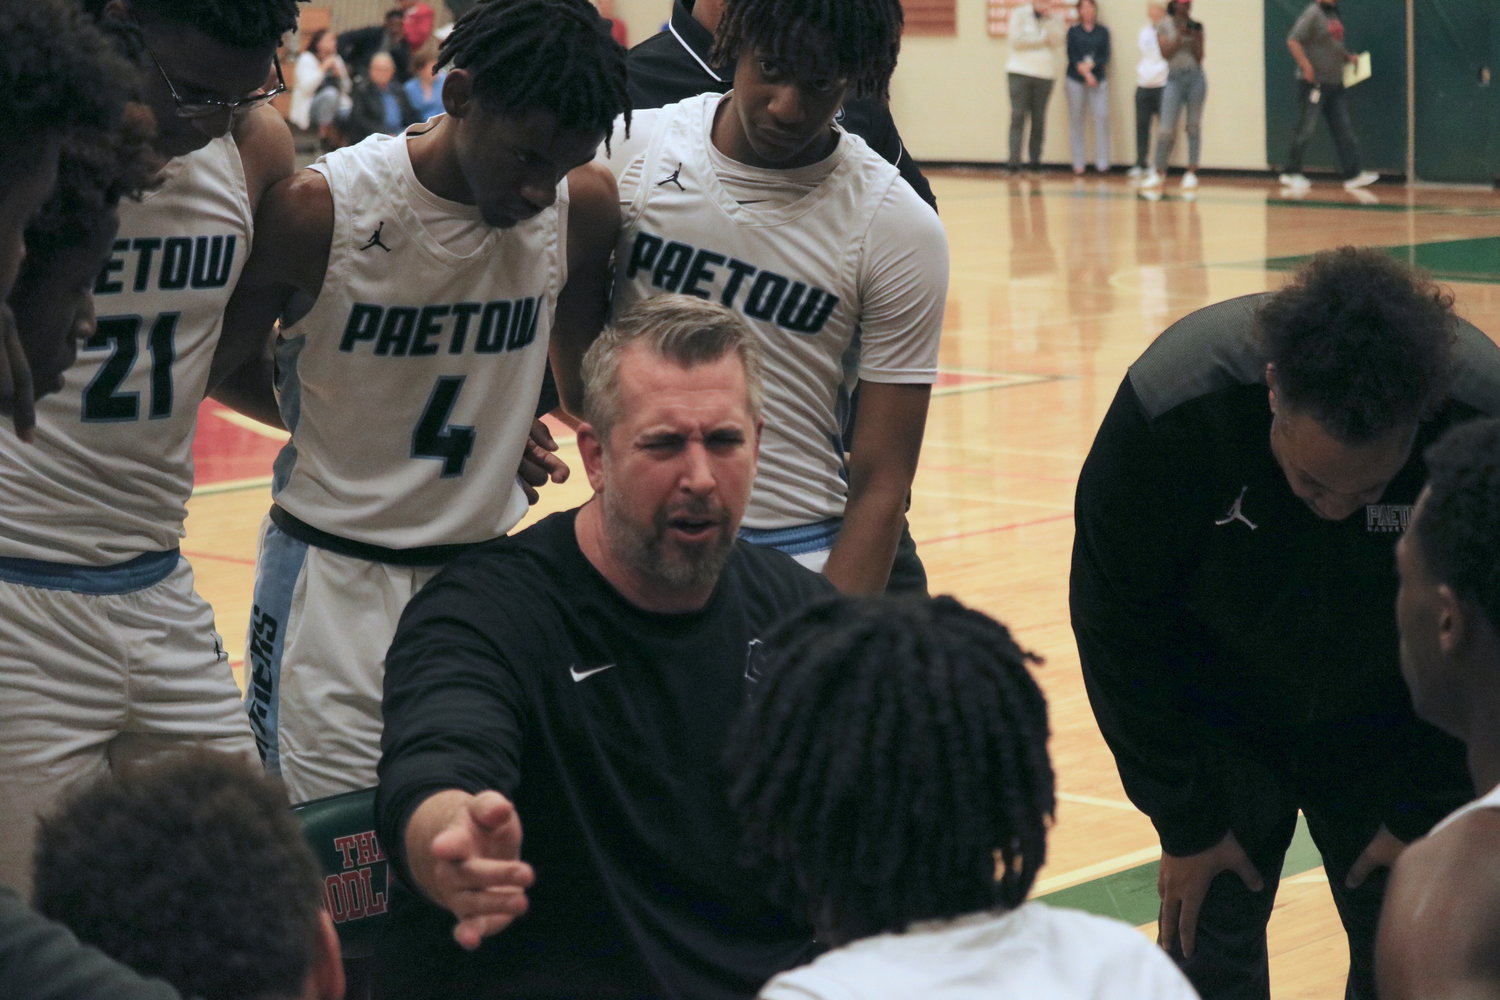 Mike Niemi talks to his team in a timeout during Monday’s game between Paetow and Kingwood Park at The Woodlands High School.